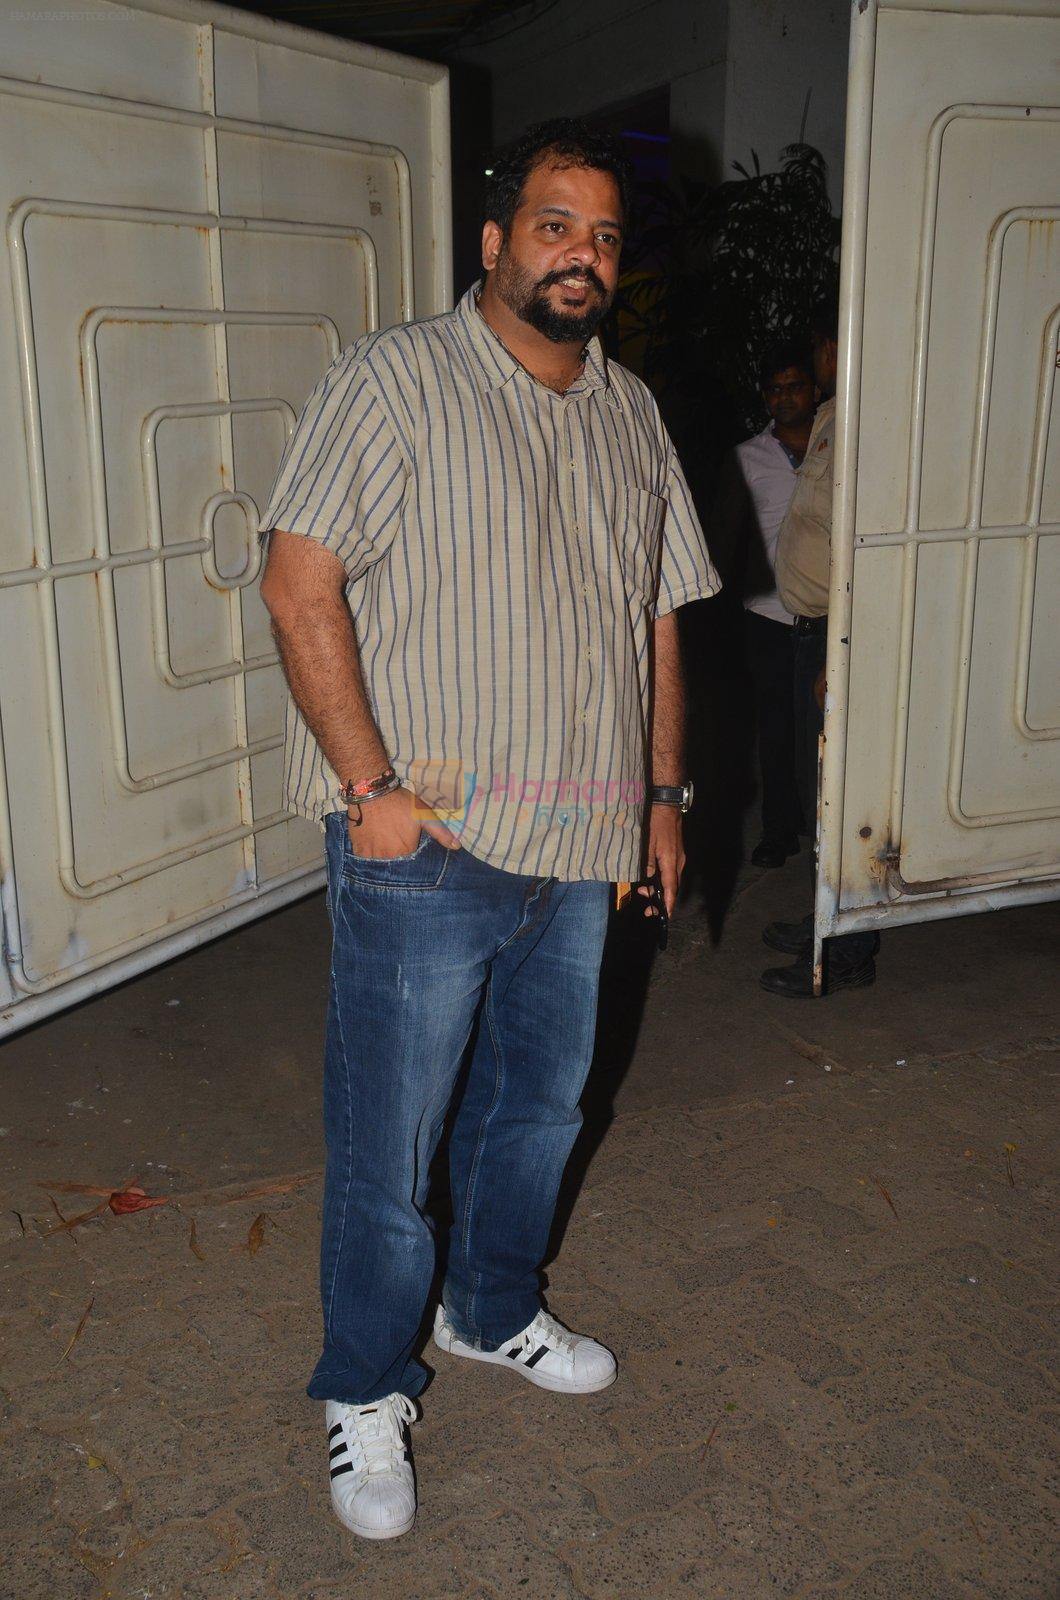 snapped at a screening on 10th June 2016